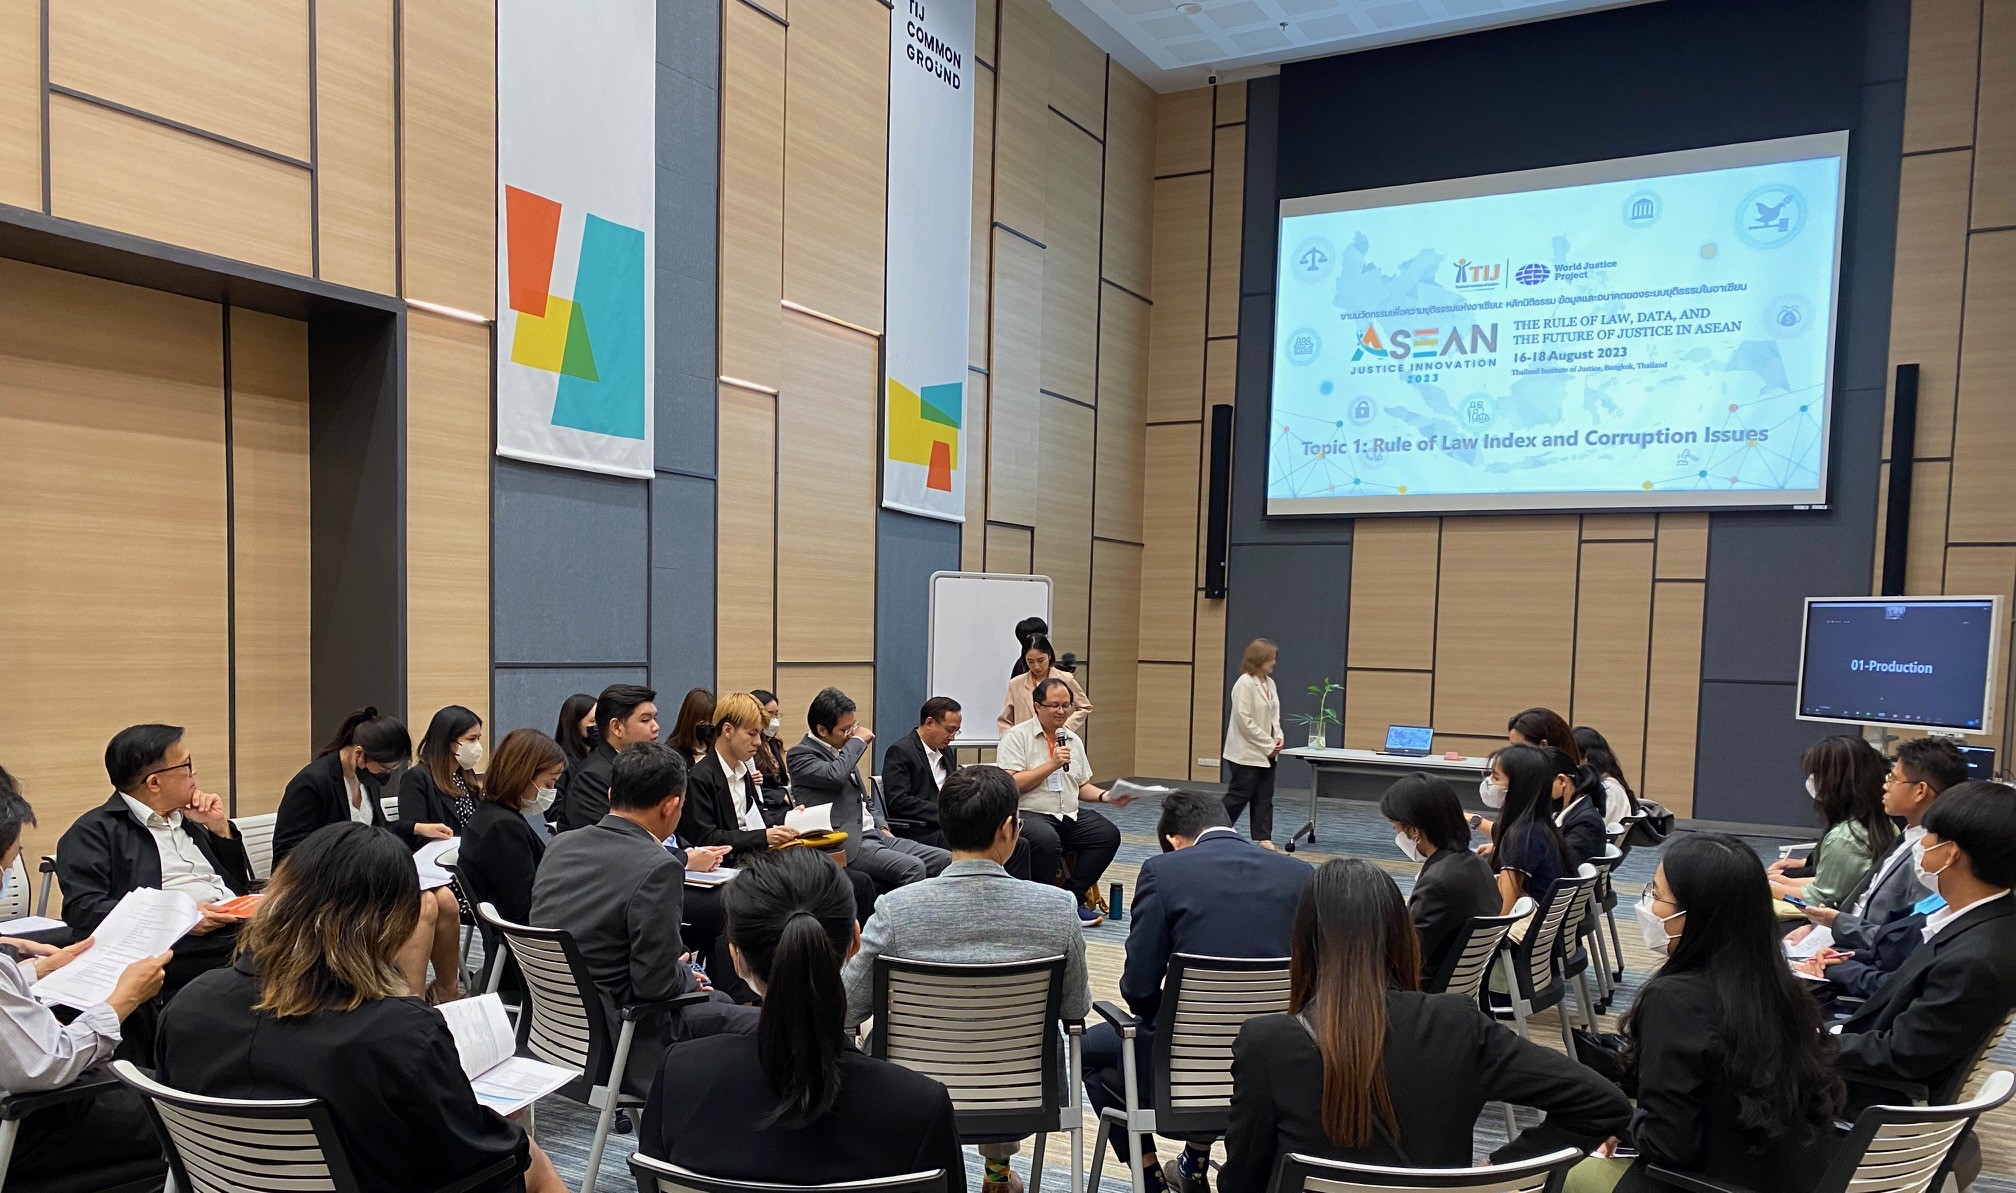 Attendees at the ASEAN Innovation for Justice 2023 conference in a session